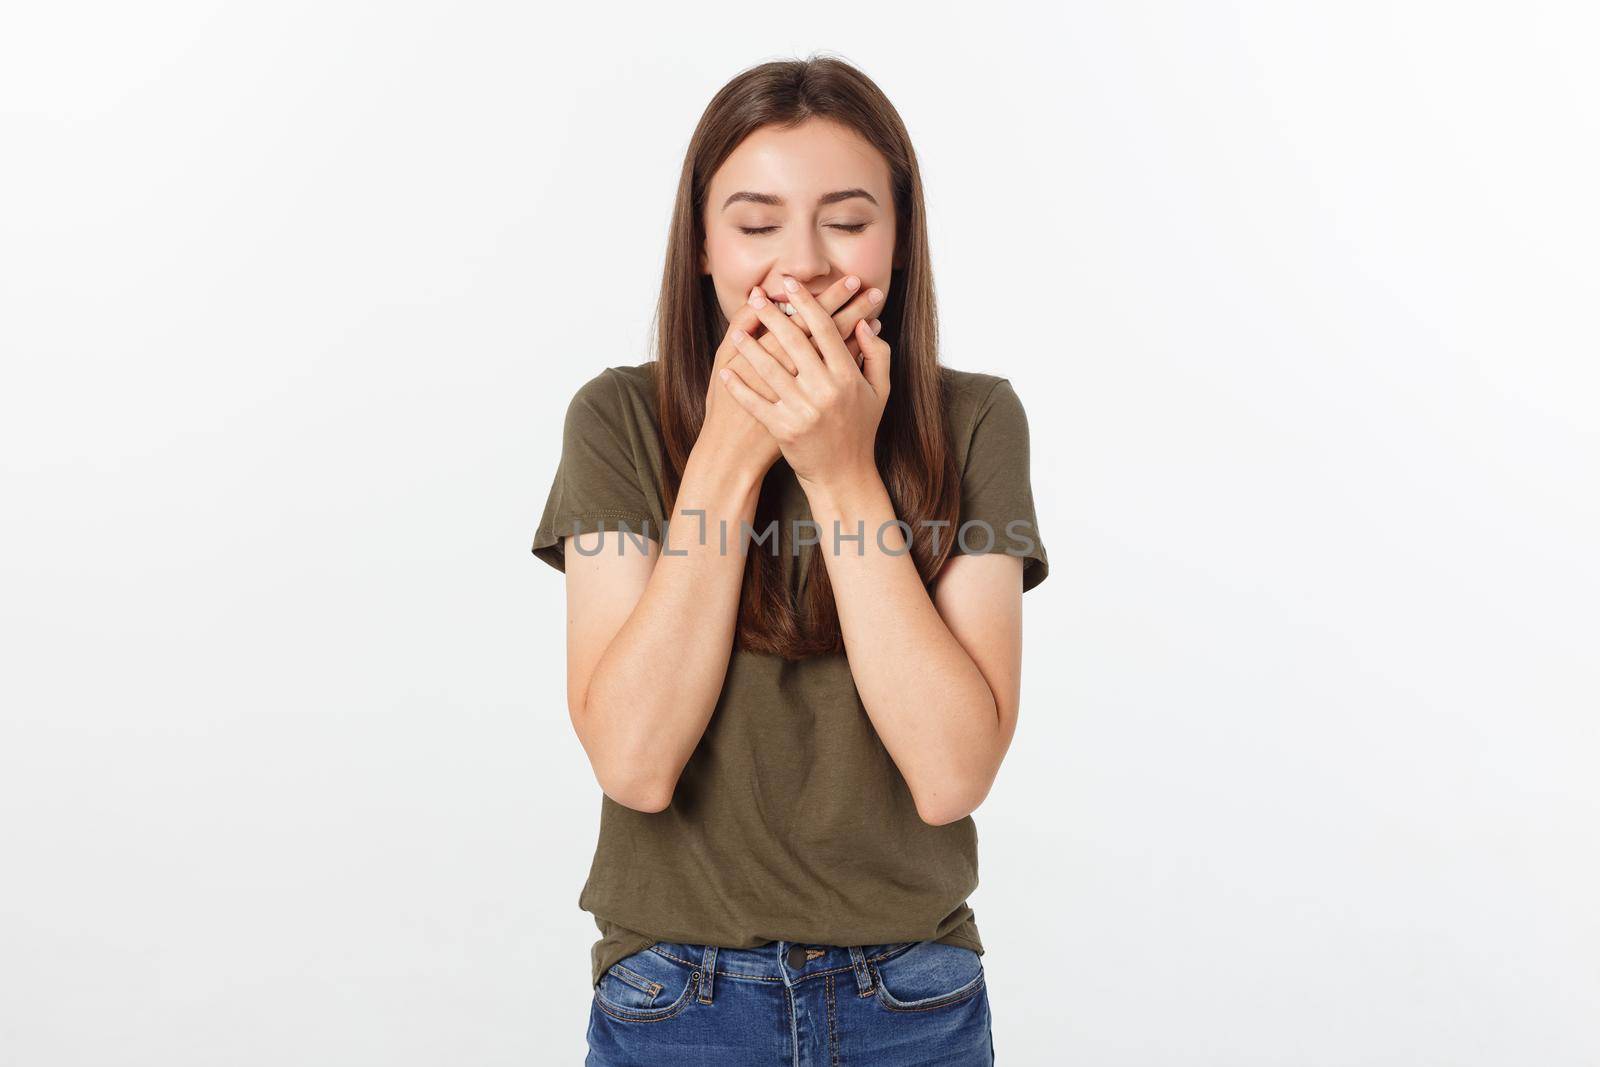 Happy woman laughing covering her mouth with a hands isolate over grey background